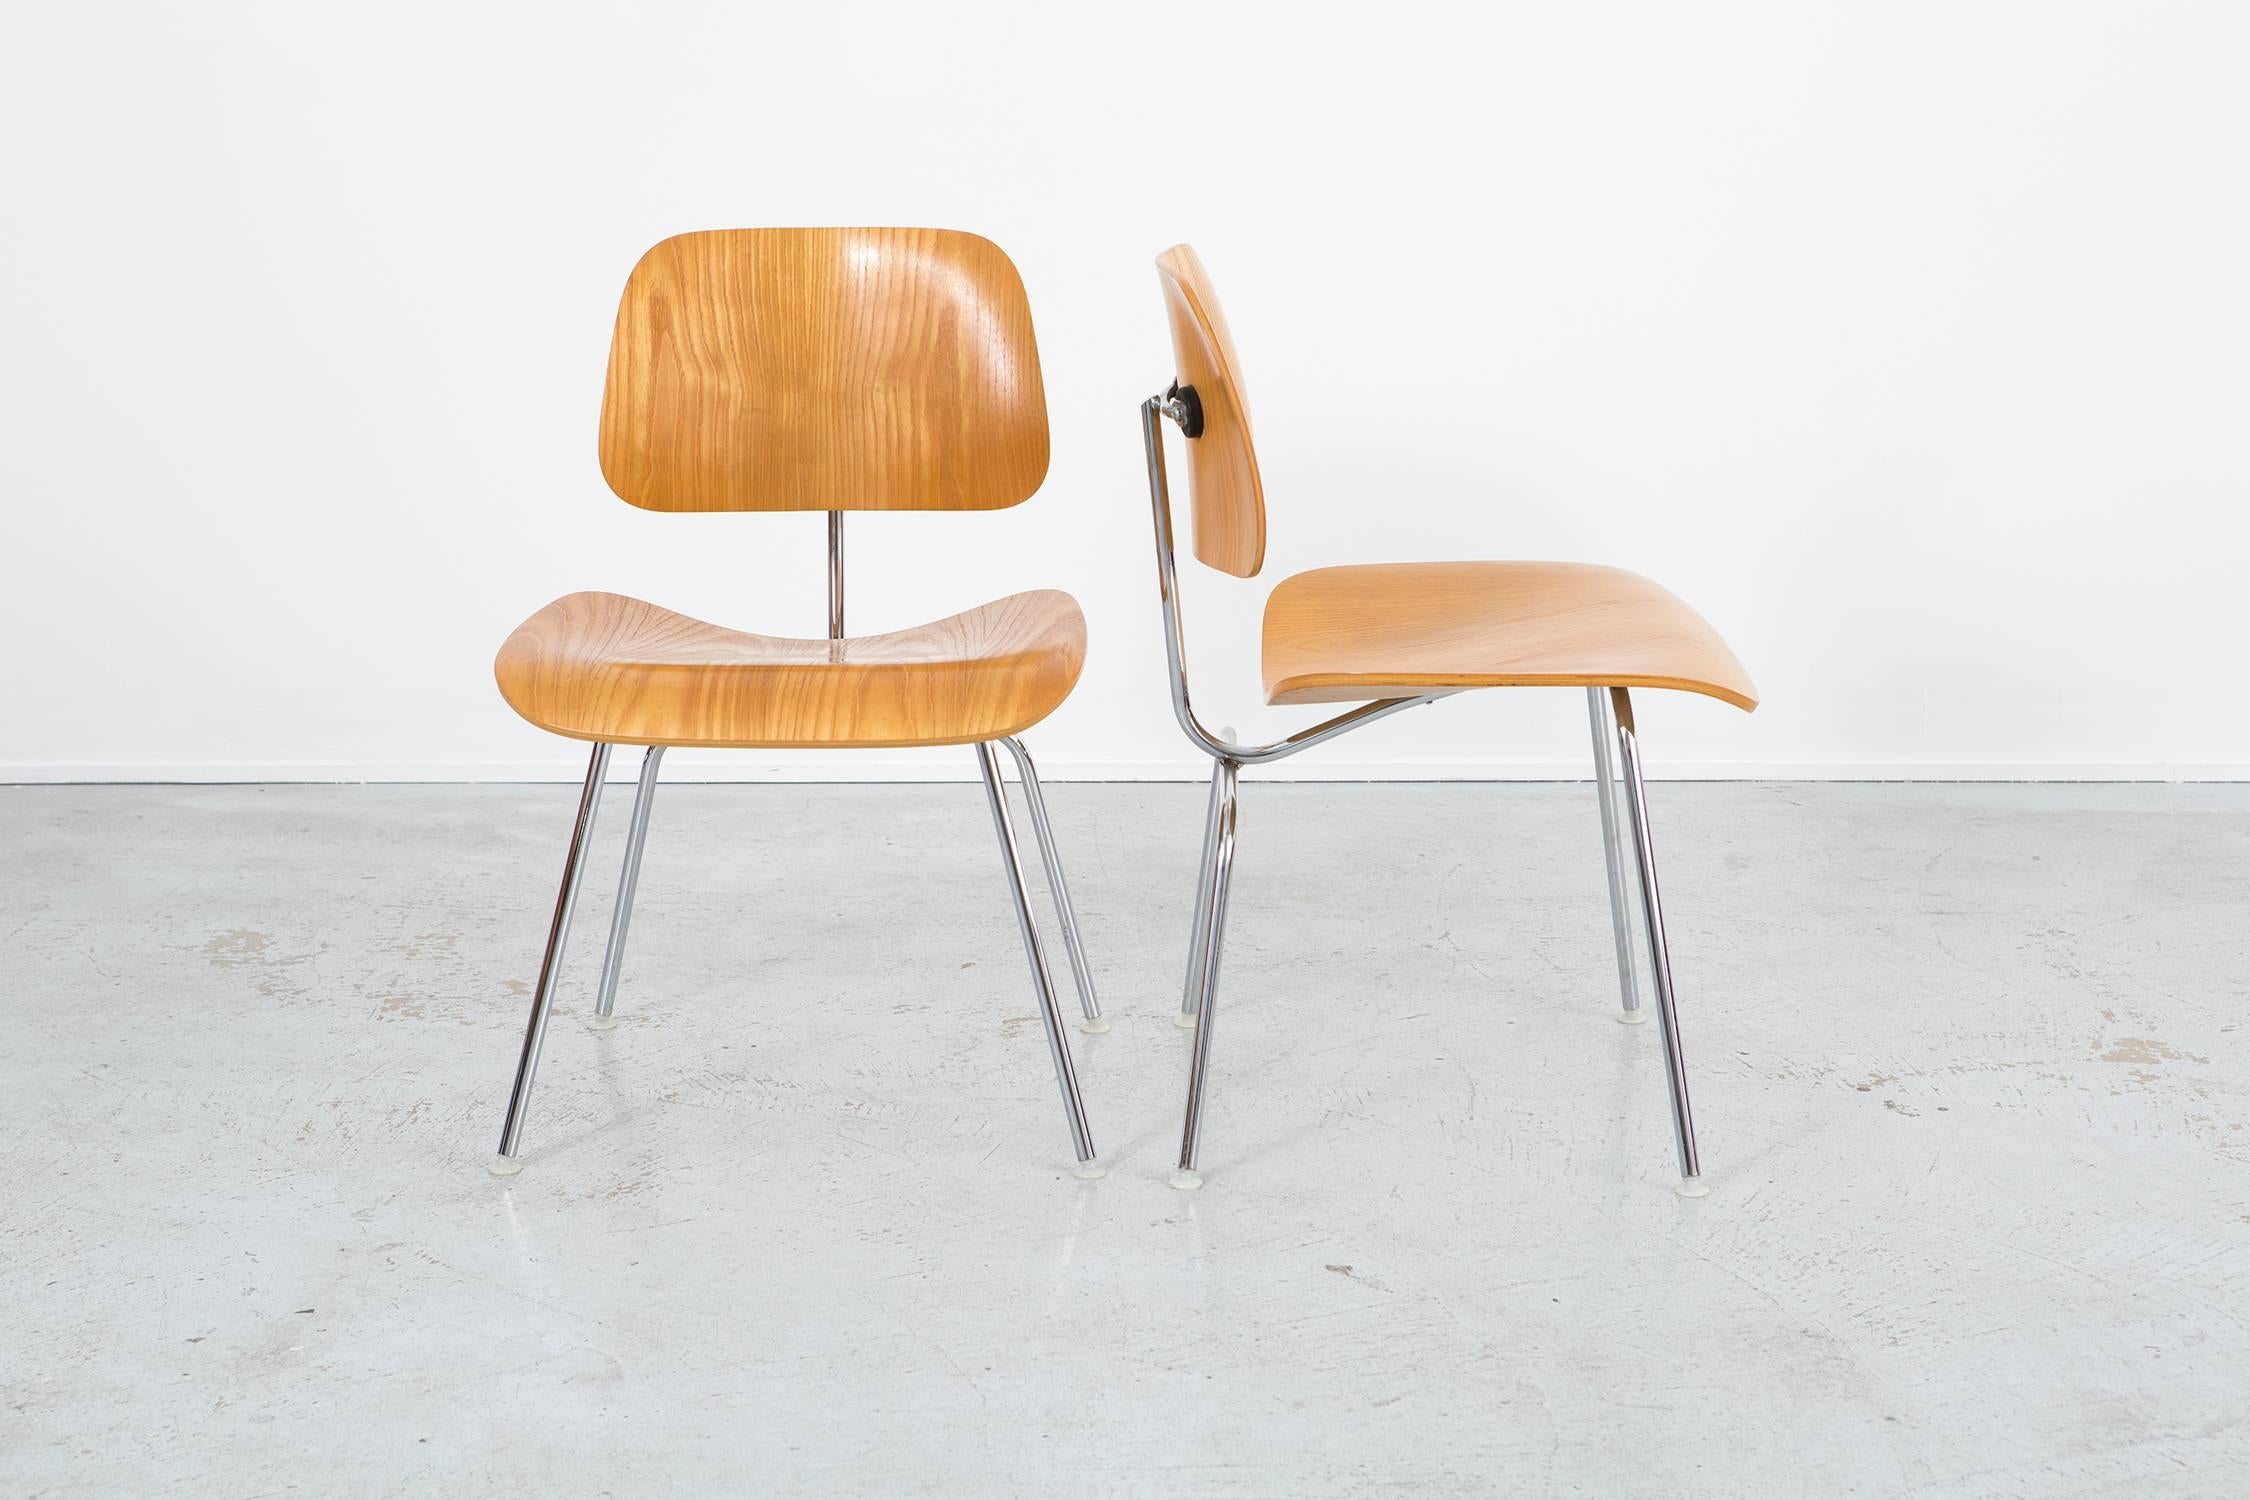 American Set of Four Mid-Century Modern Eames Dining Chairs for Herman Miller